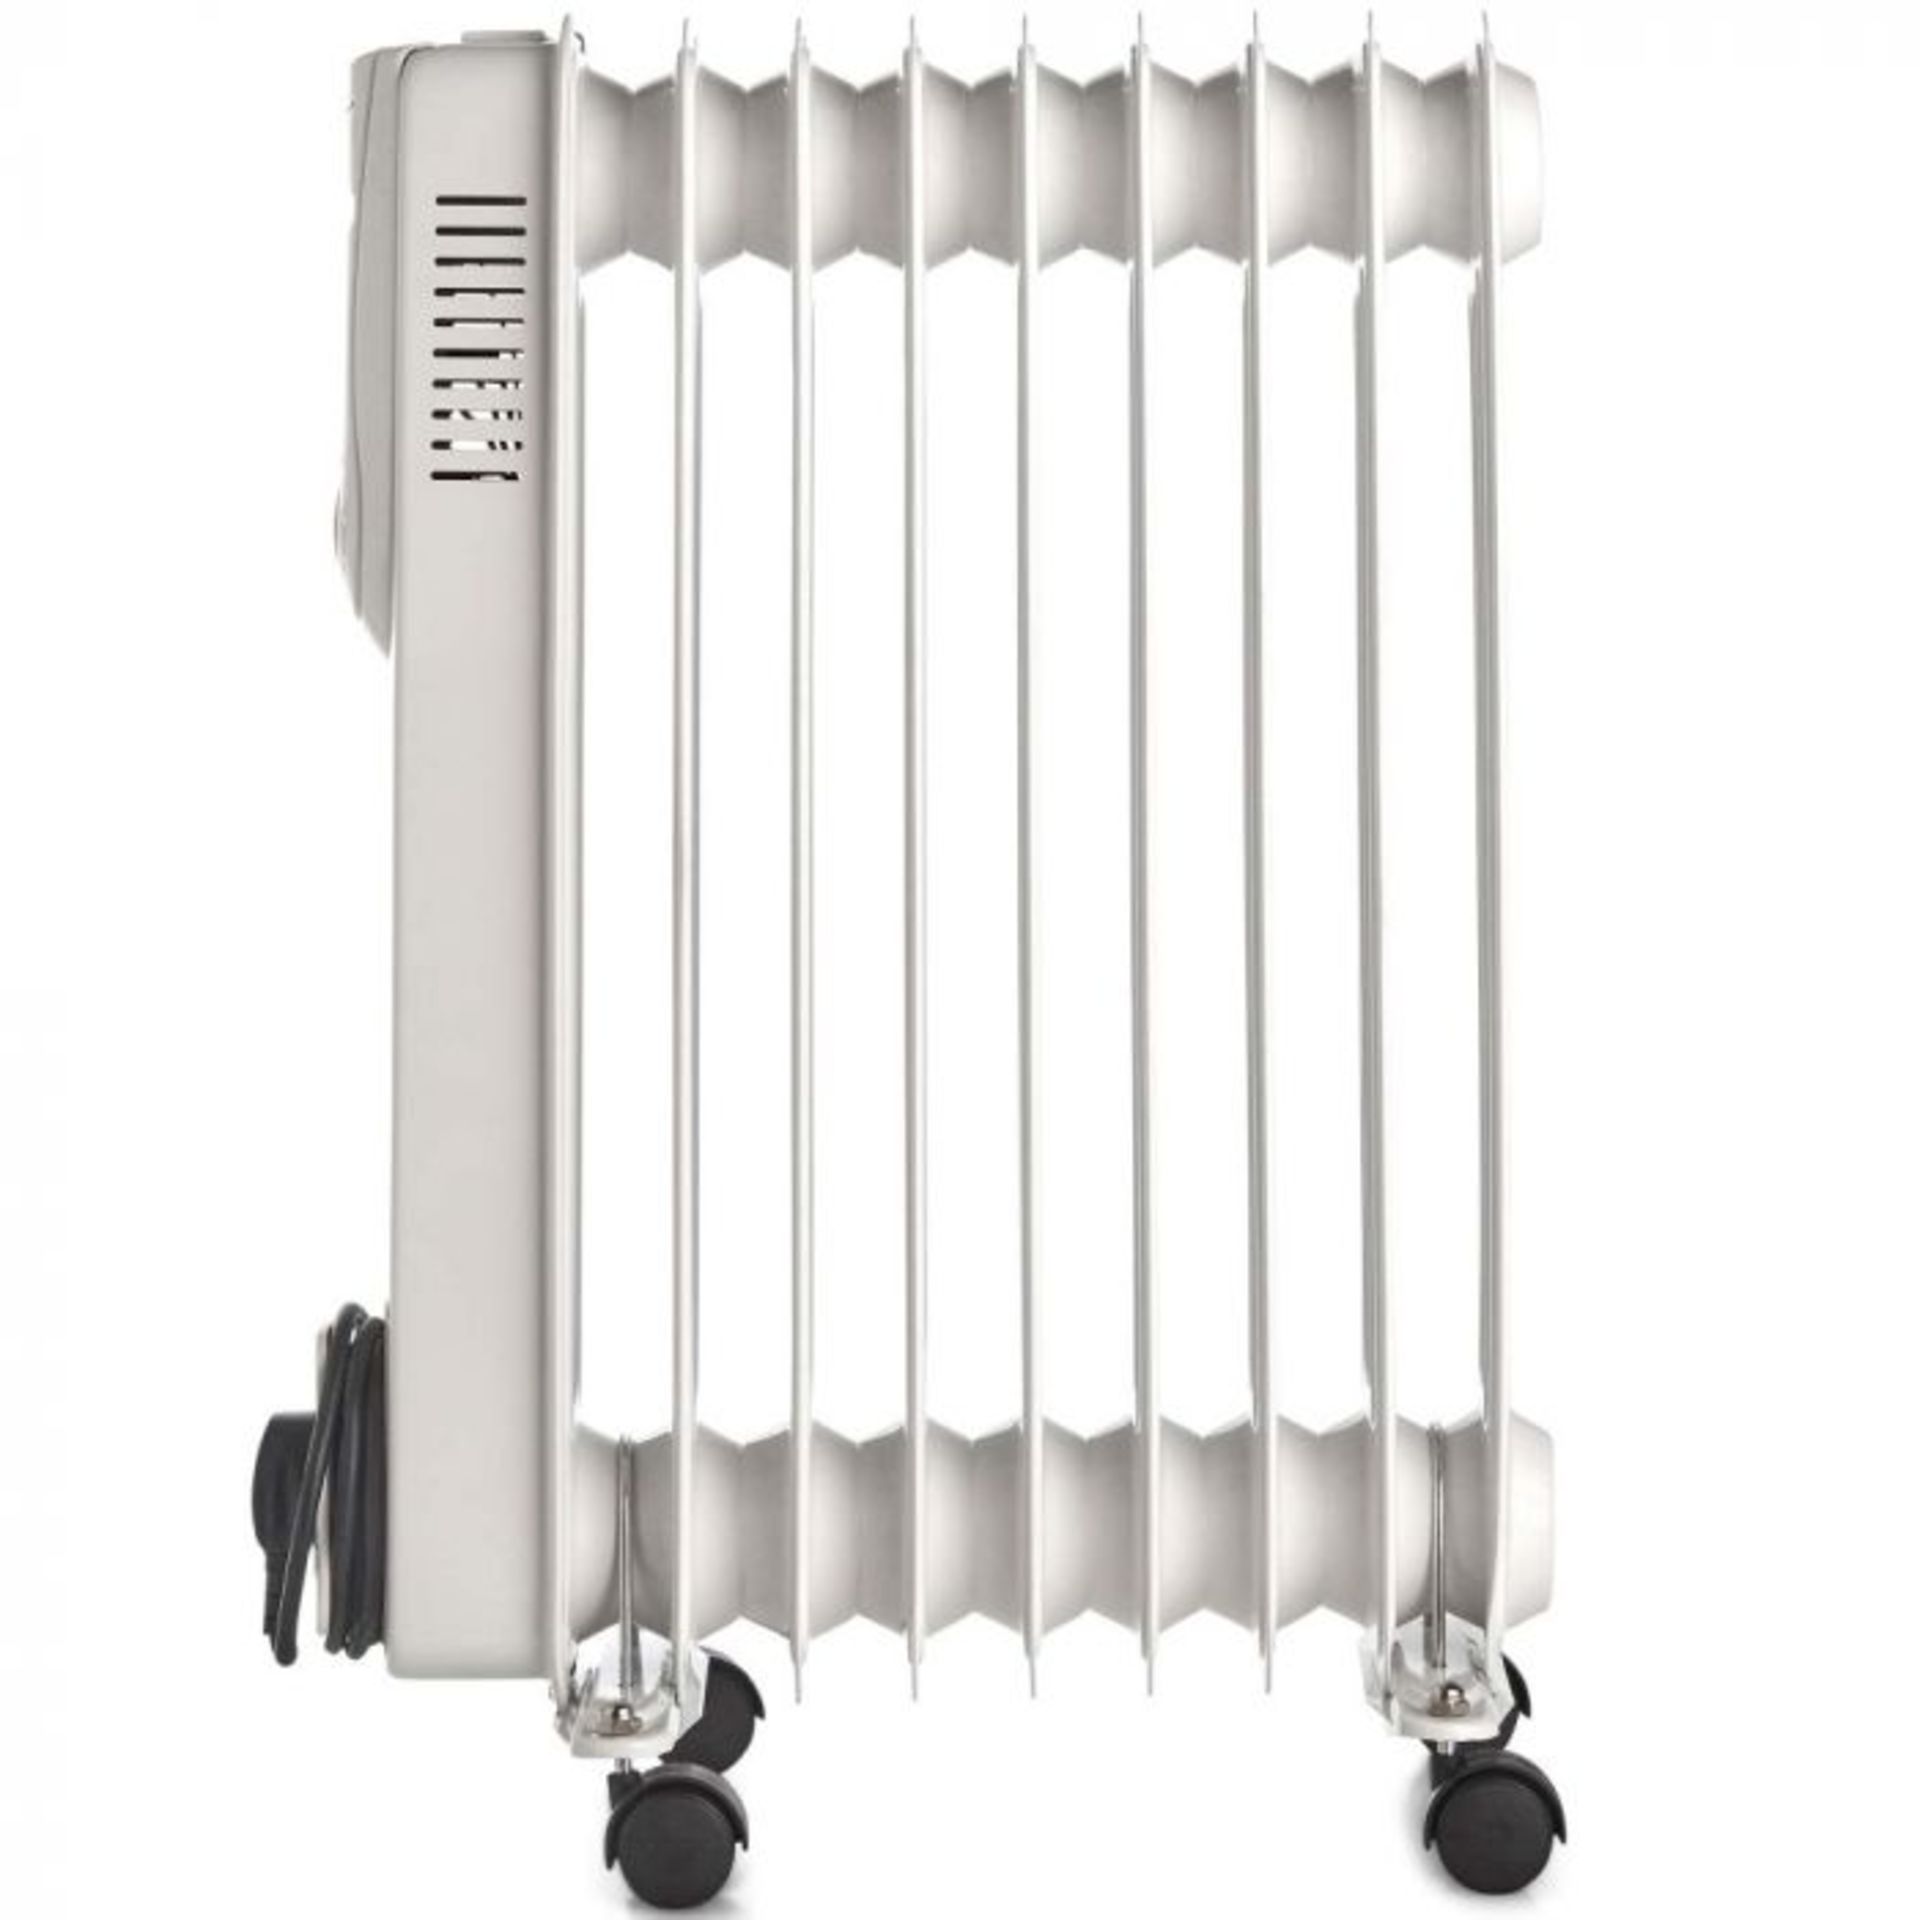 (S424) 9 Fin 2000W Oil Filled Radiator - White Powerful 2000W radiator with 9 oil-filled fins ... - Image 4 of 4